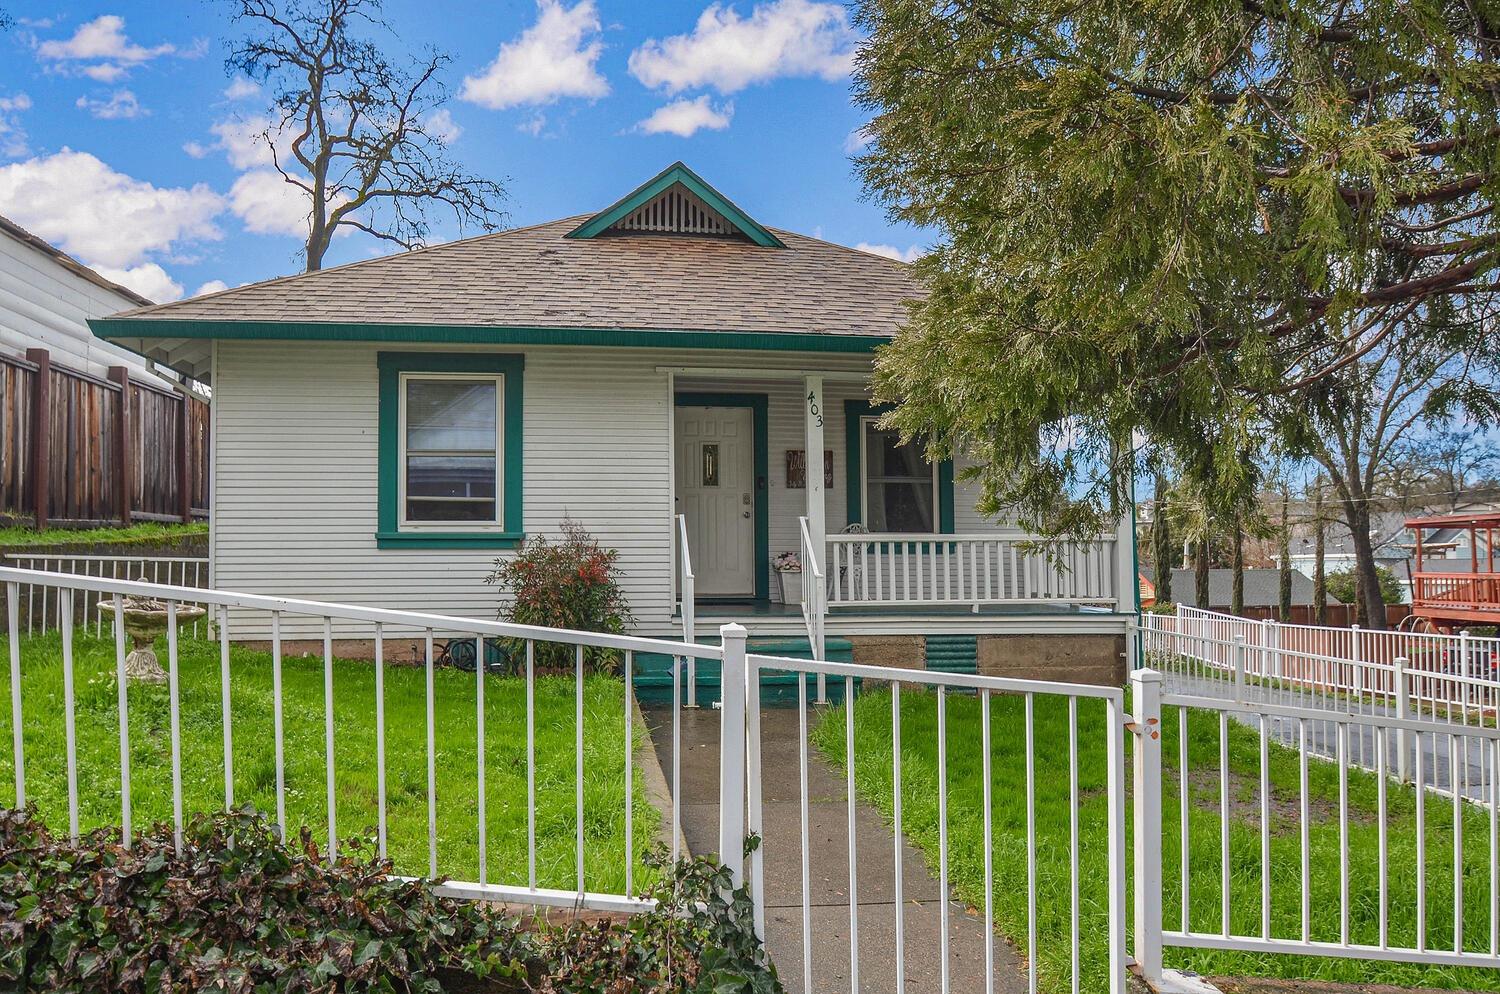 Photo of 403 Bright Ave in Jackson, CA